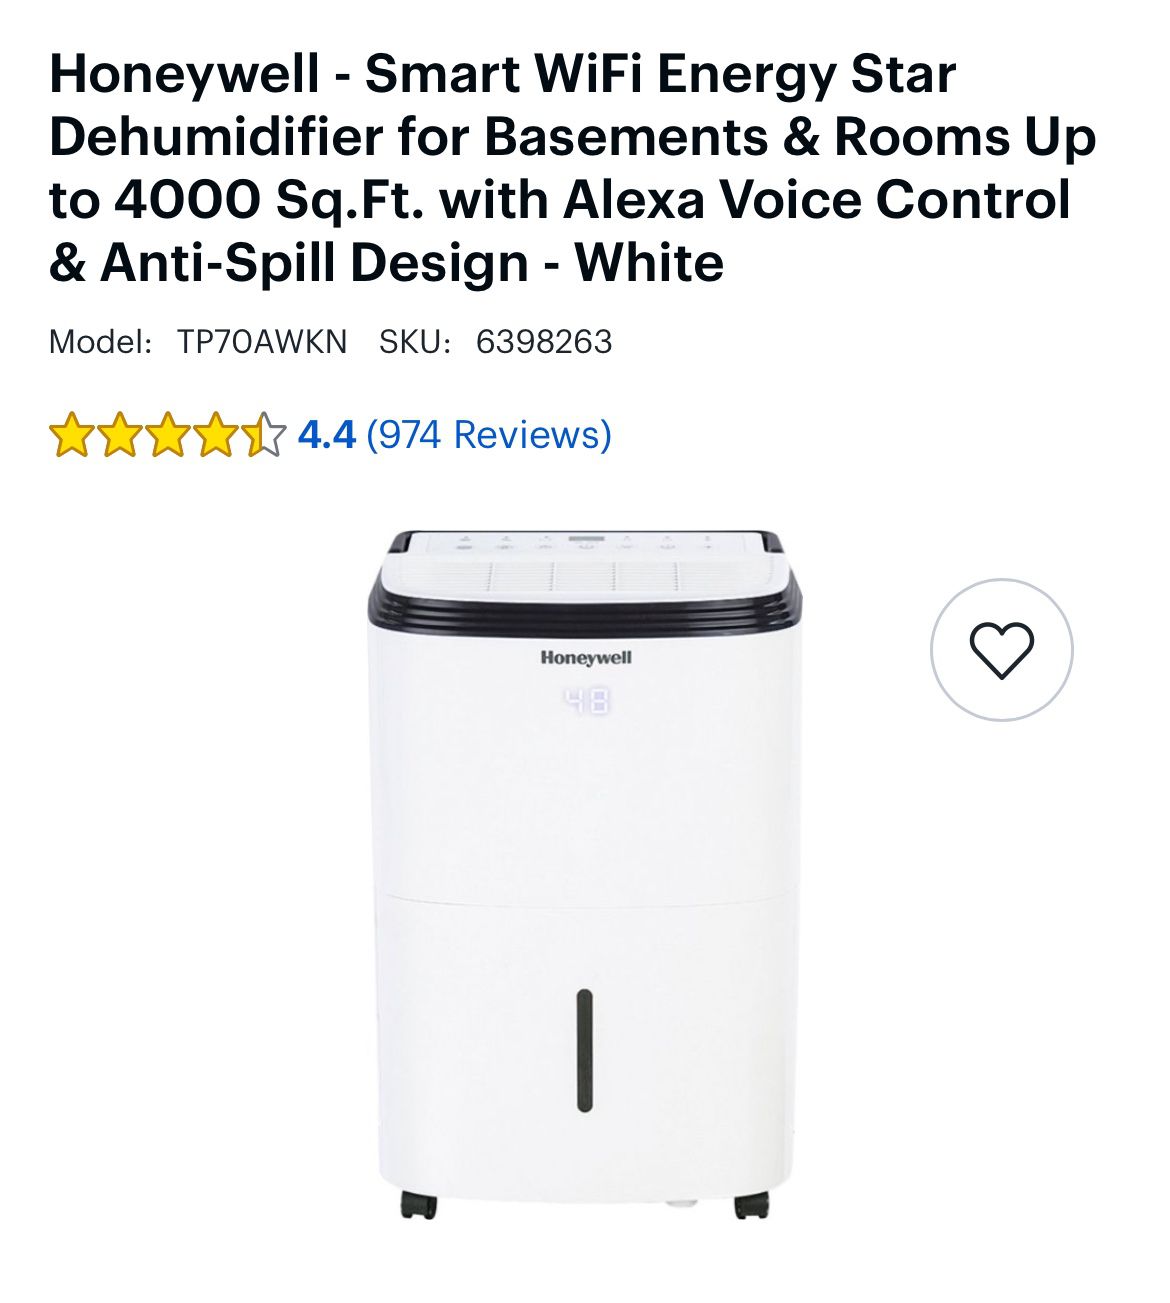 Honeywell - Smart WiFi Energy Star Dehumidifier for Basements & Rooms Up to 4000 Sq.Ft. with Alexa Voice Control & Anti-Spill Design - White 